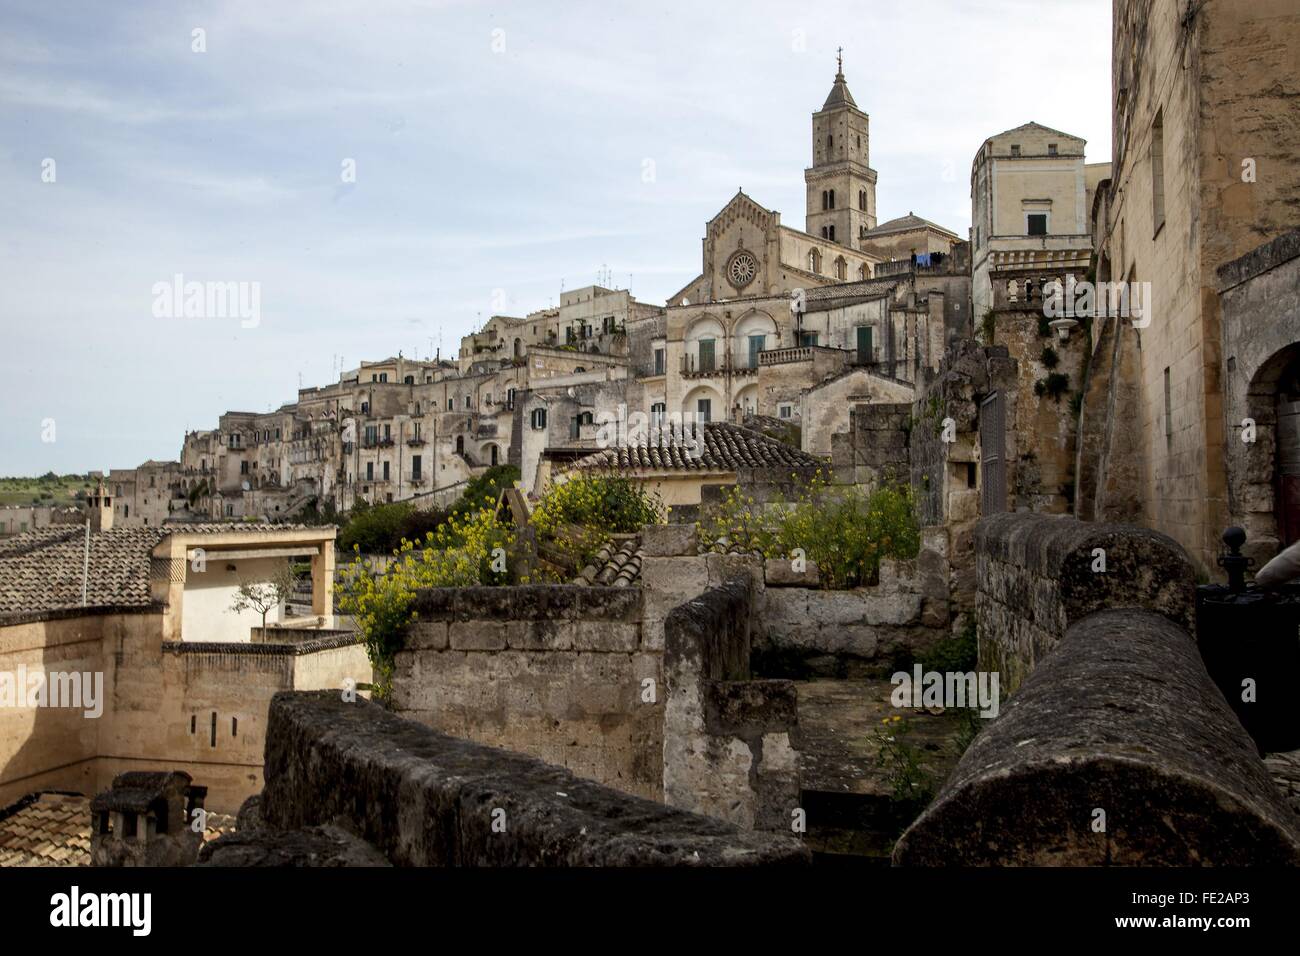 Matera  European Capital of Culture 2019. The Sassi of Matera was listed as one of the UNESCO World Heritage Sites in 1993. Basi Stock Photo